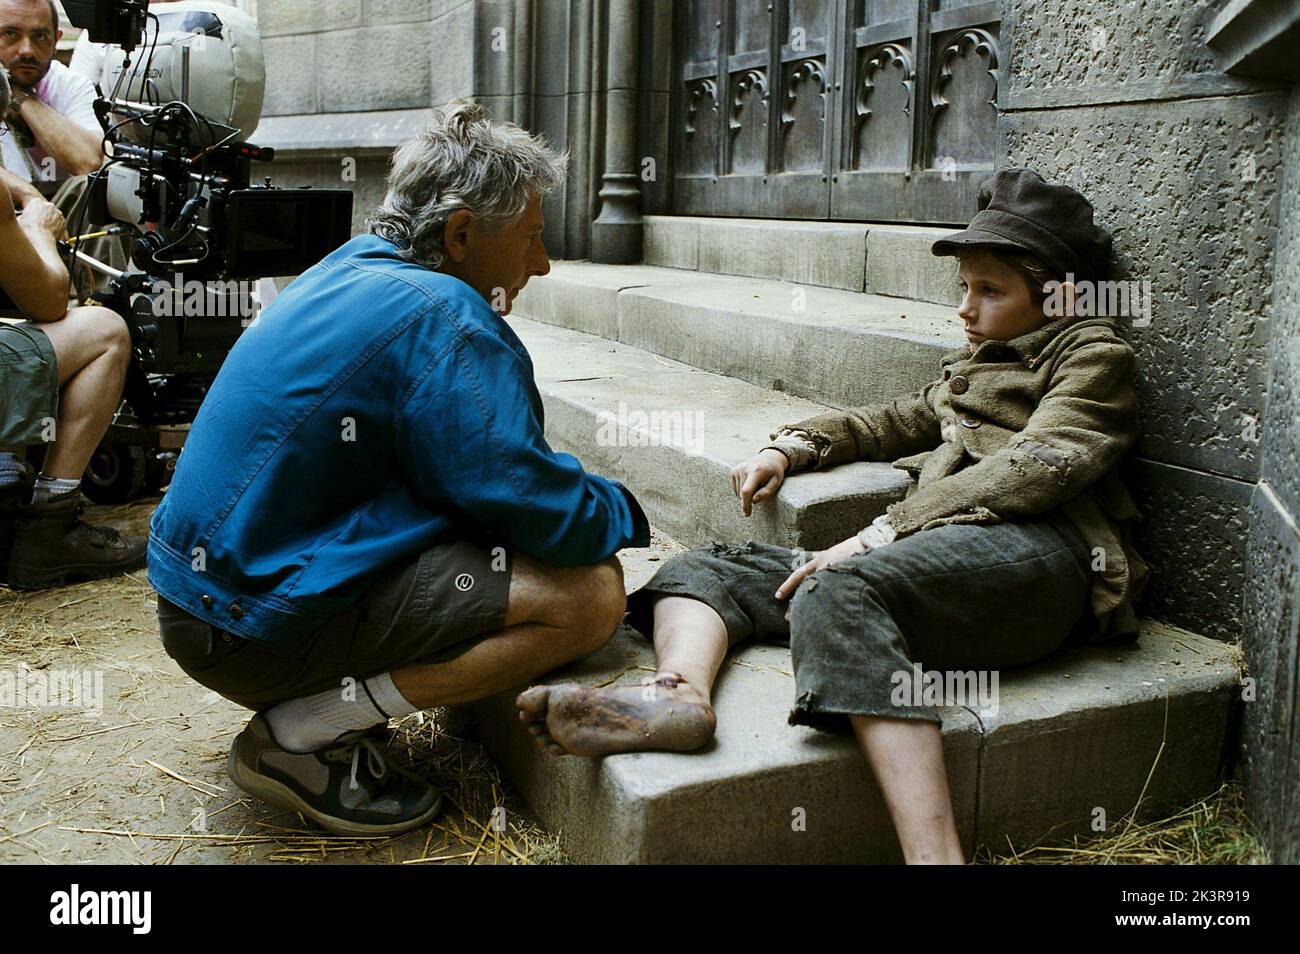 Roman Polanski & Barney Clark Film: Oliver Twist (UK/FR/IT/CZ 2005)  Characters: & Oliver Twist / Literaturverfilmung (Based On The Book By  Charles Dickens) Director: Roman Polanski 11 September 2005 **WARNING**  This Photograph